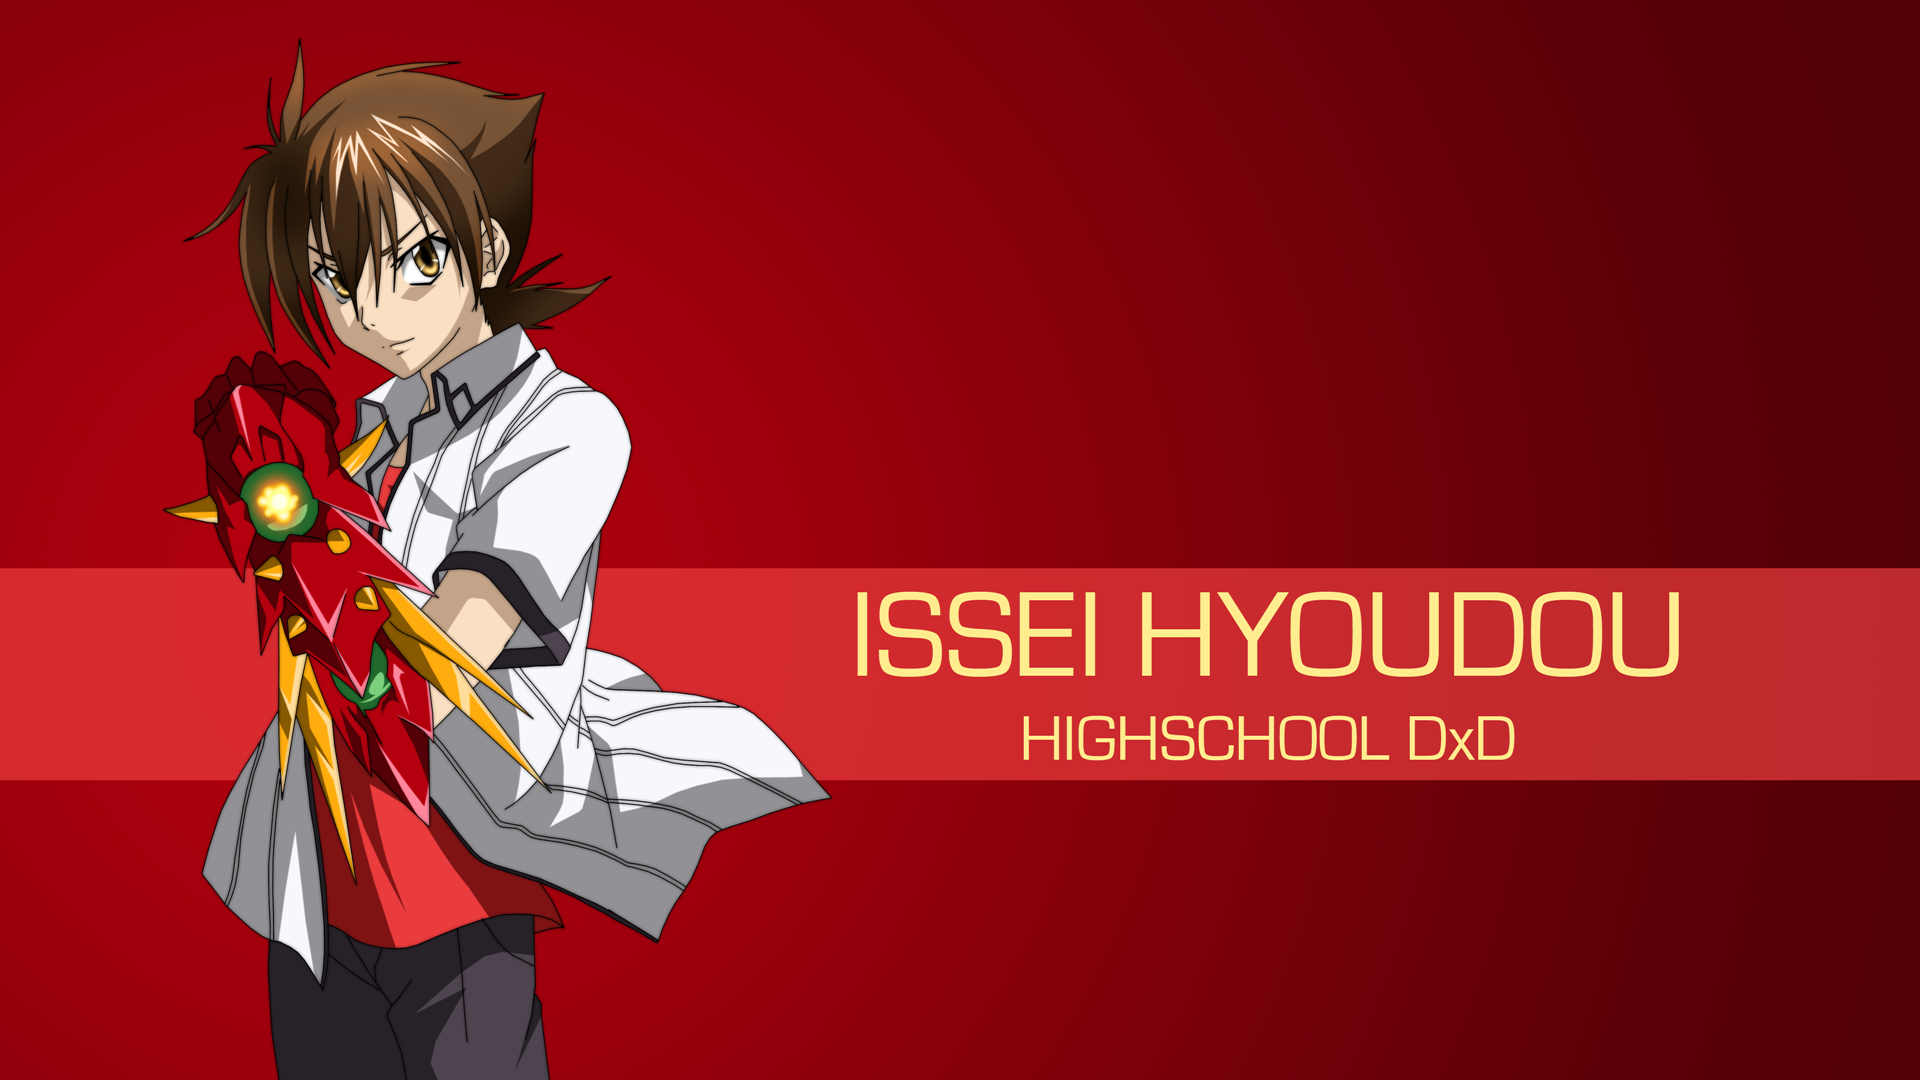 Highschool DxD Hyoudou Issei Red Background Anime 1920x1080